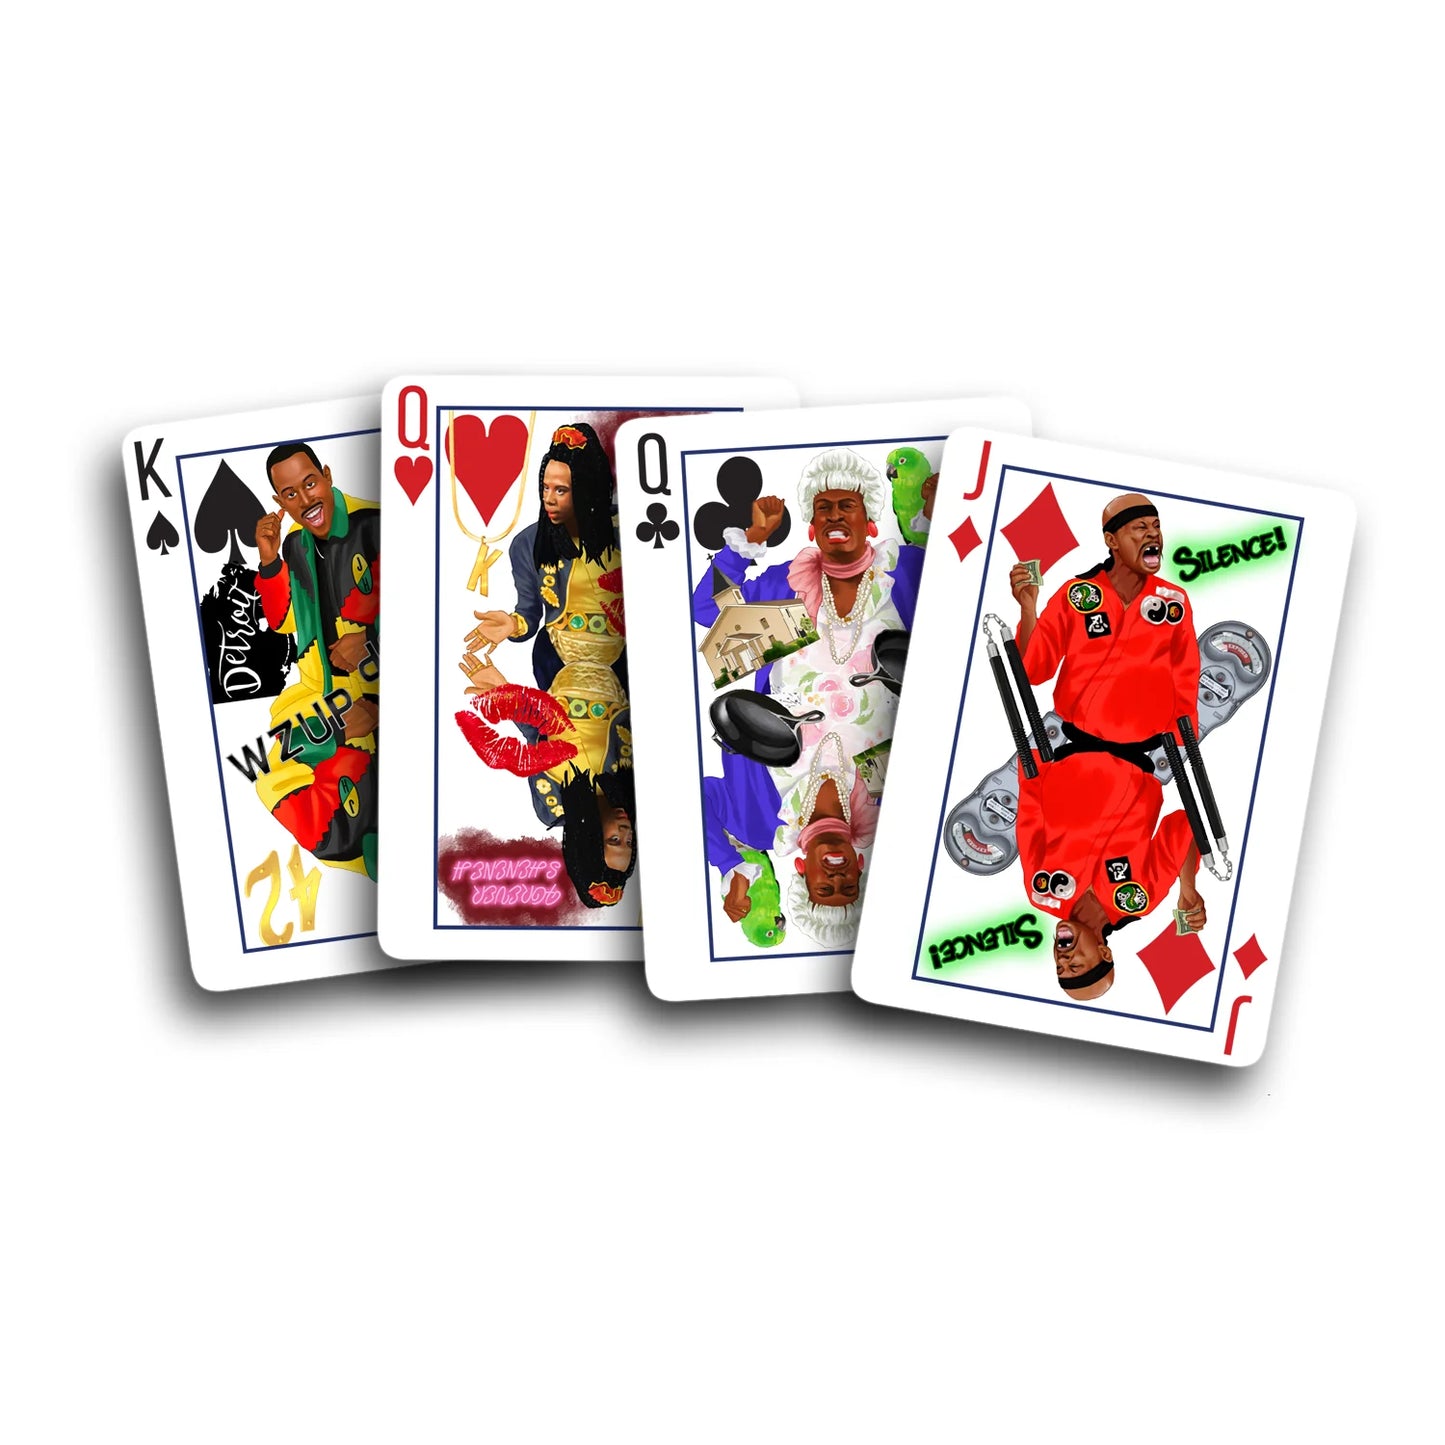 The "MARTIN" Playing Cards